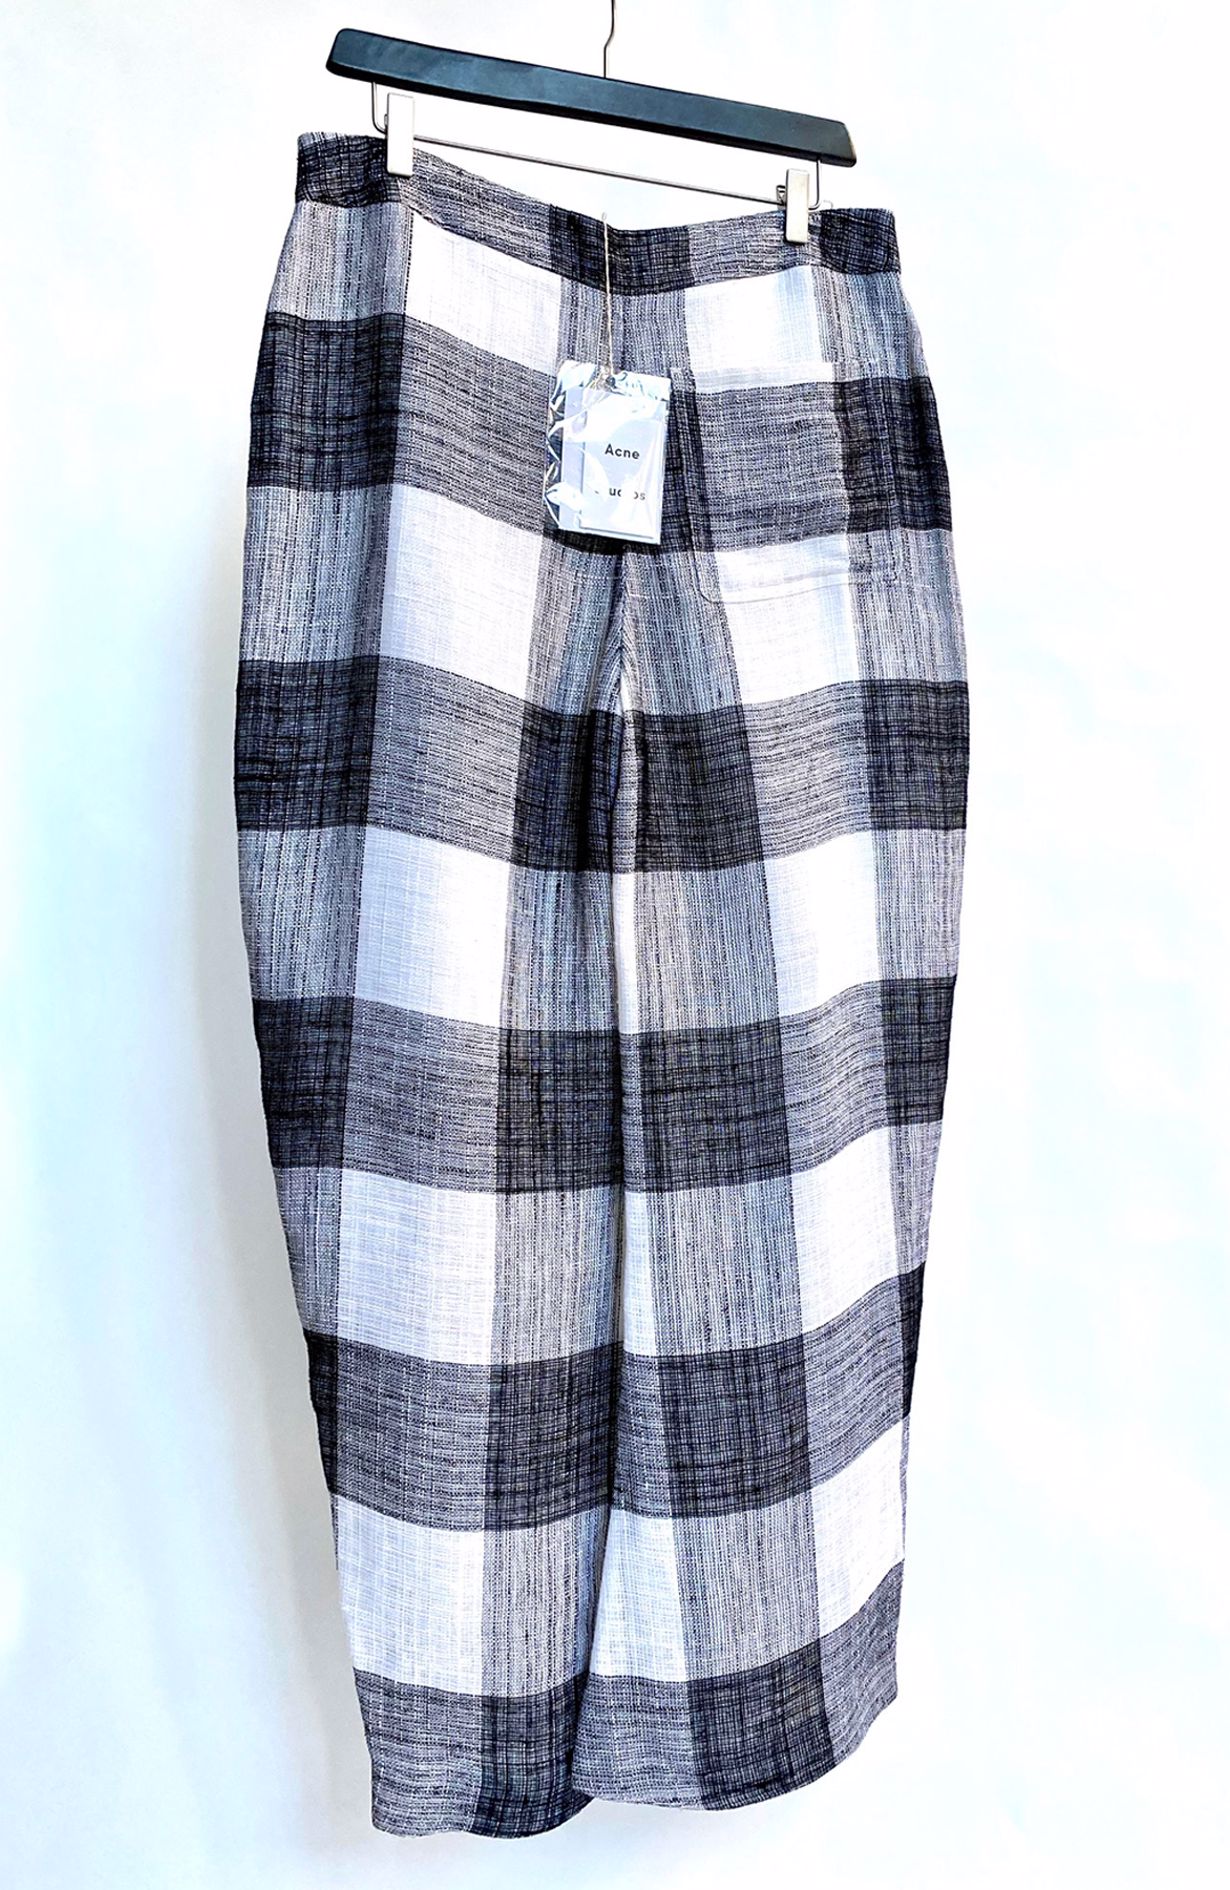 Acne Checkered Pants - Size 40